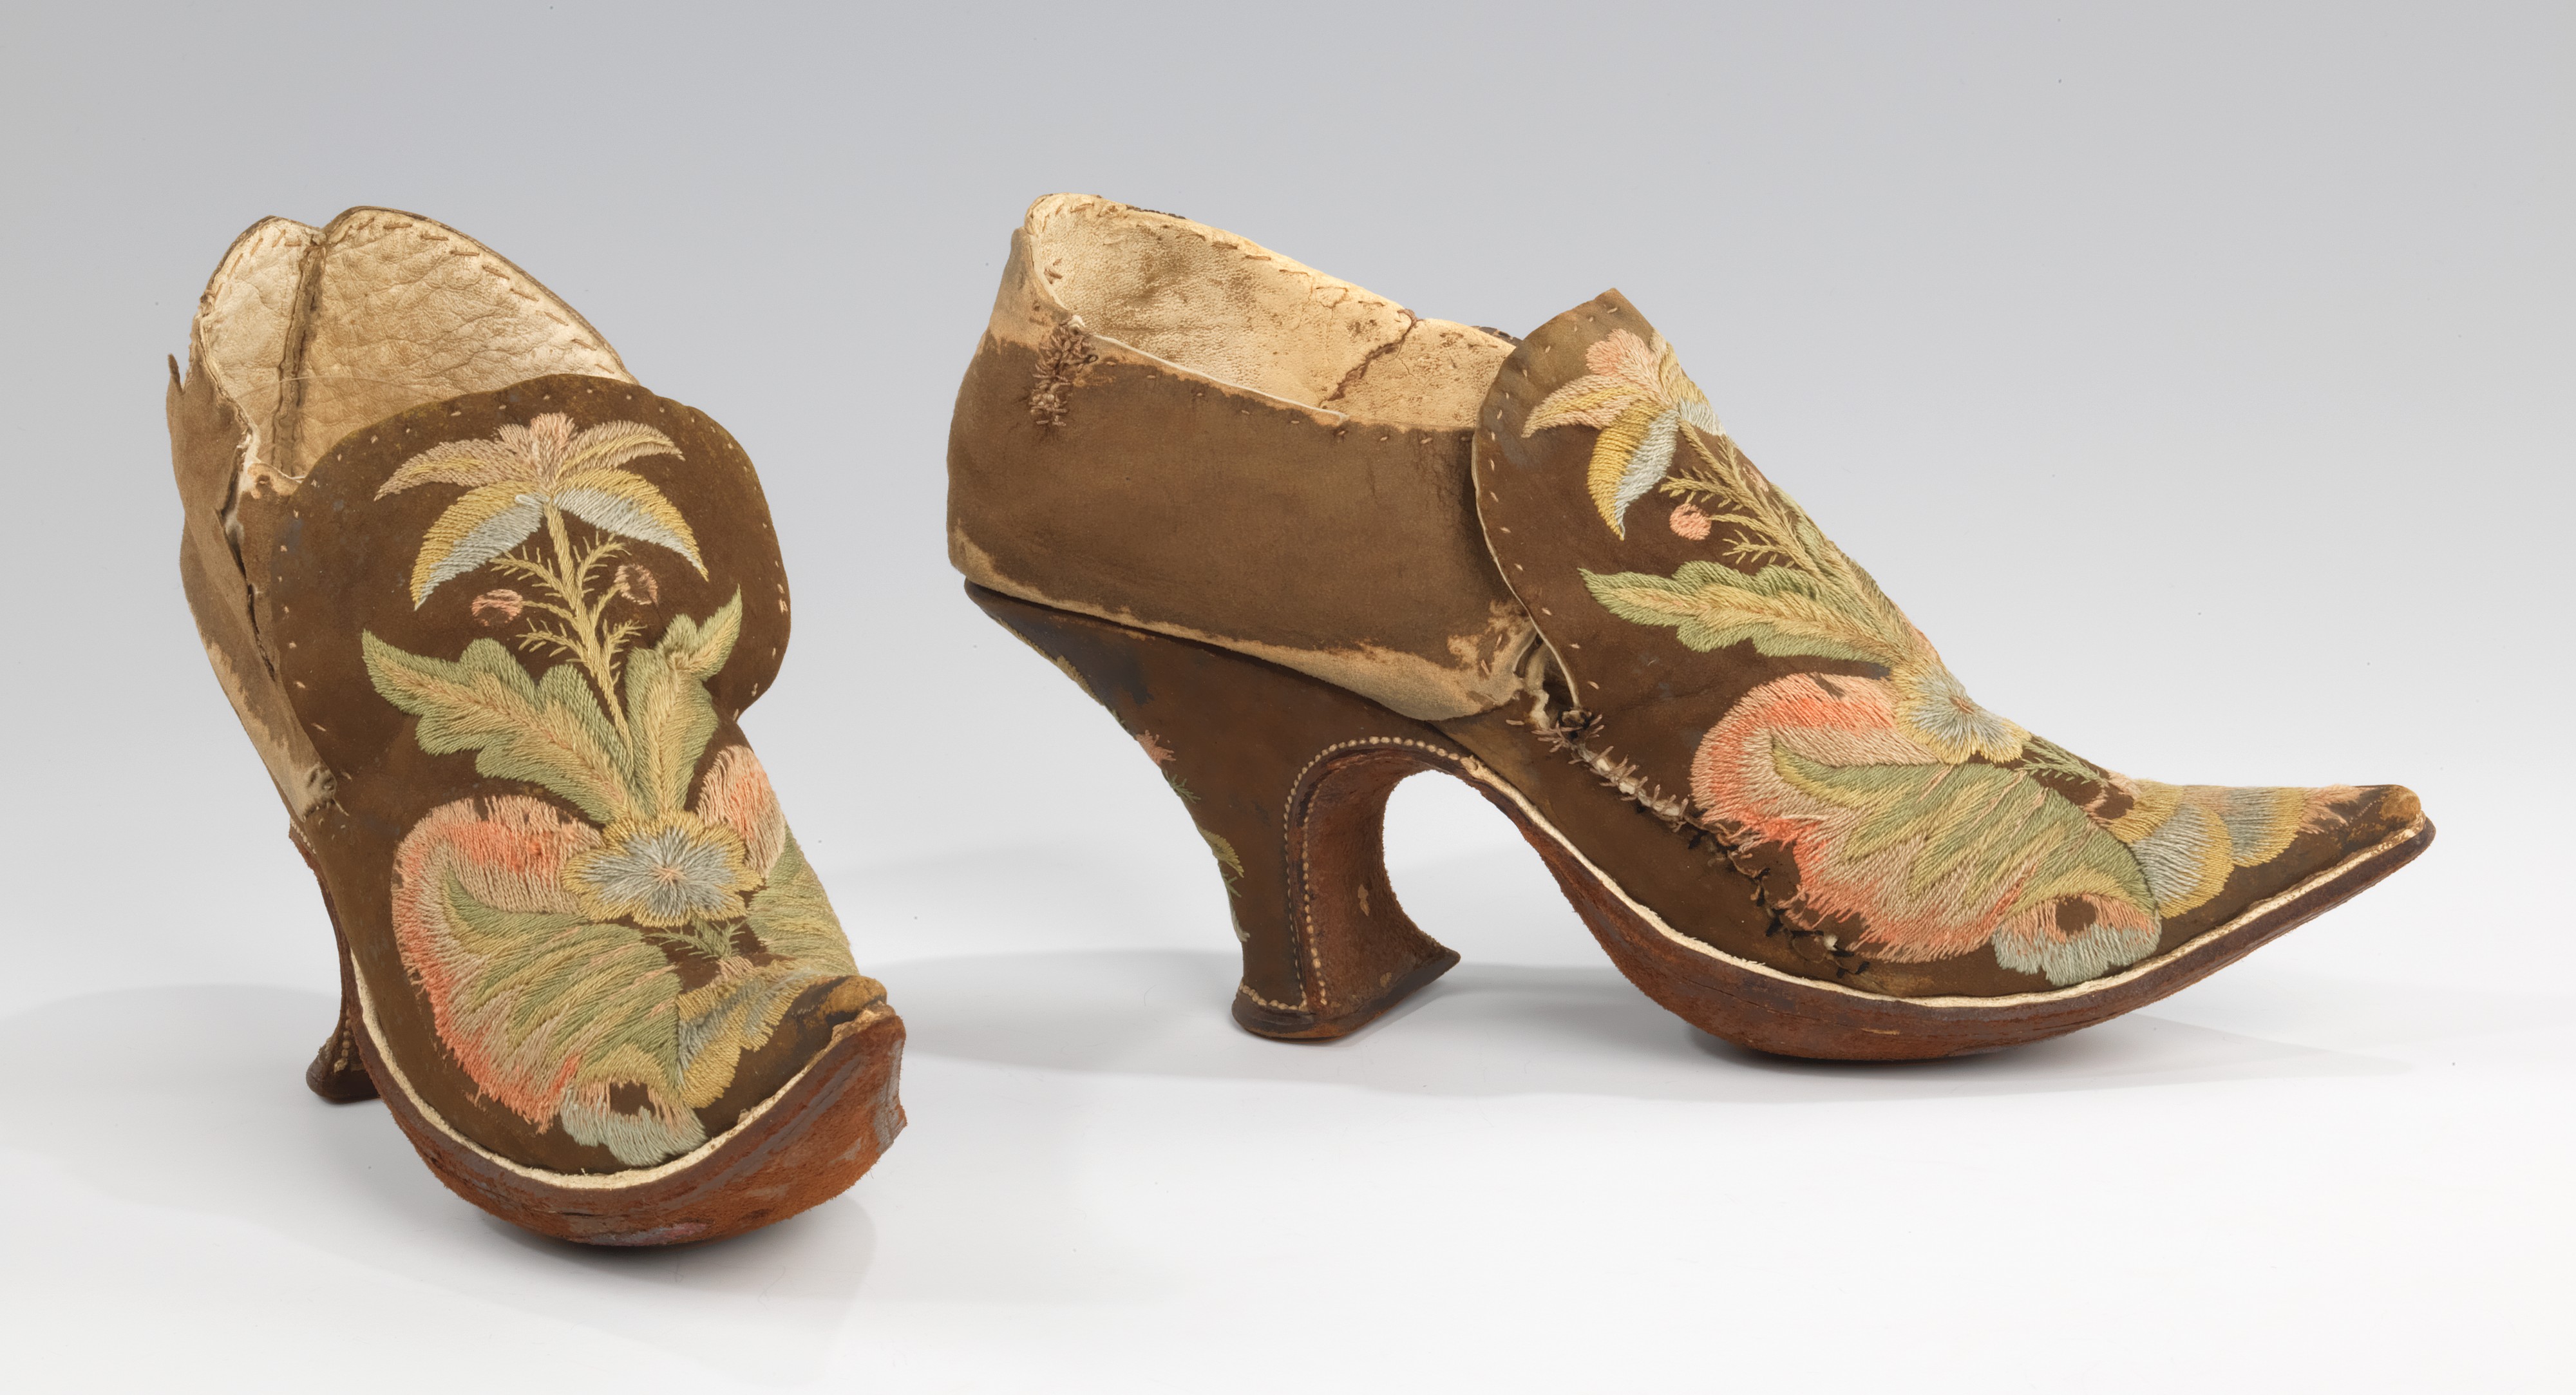 European heeled shoes from ca. 1690